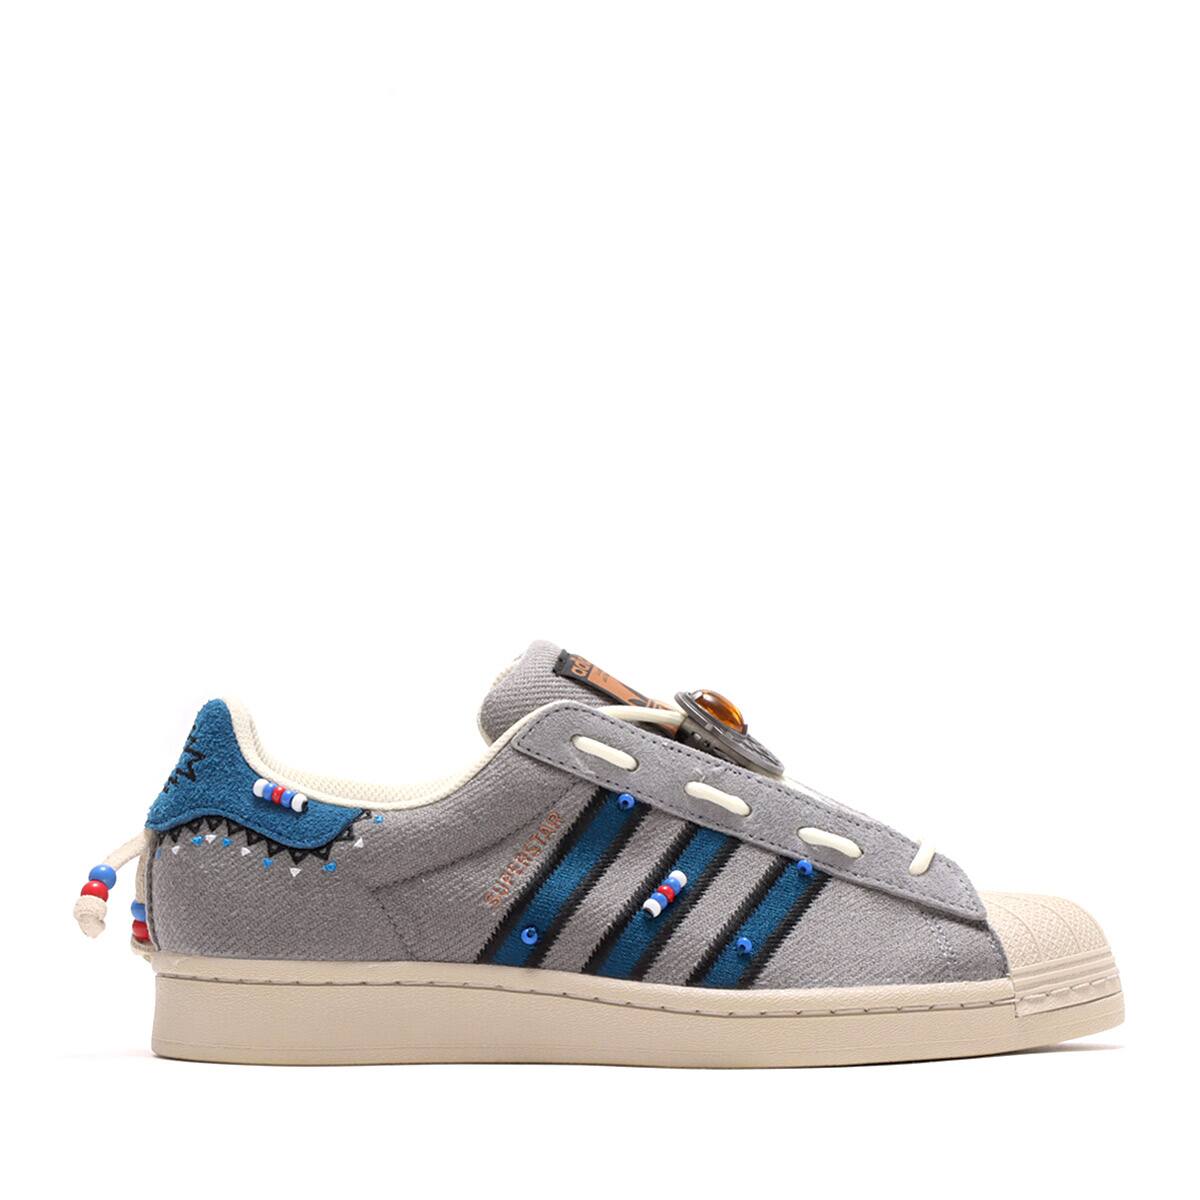 adidas SUPERSTAR LACELESS GRAY THREE/LEGEND MARIN/CLEAR BROWN 20FW-S